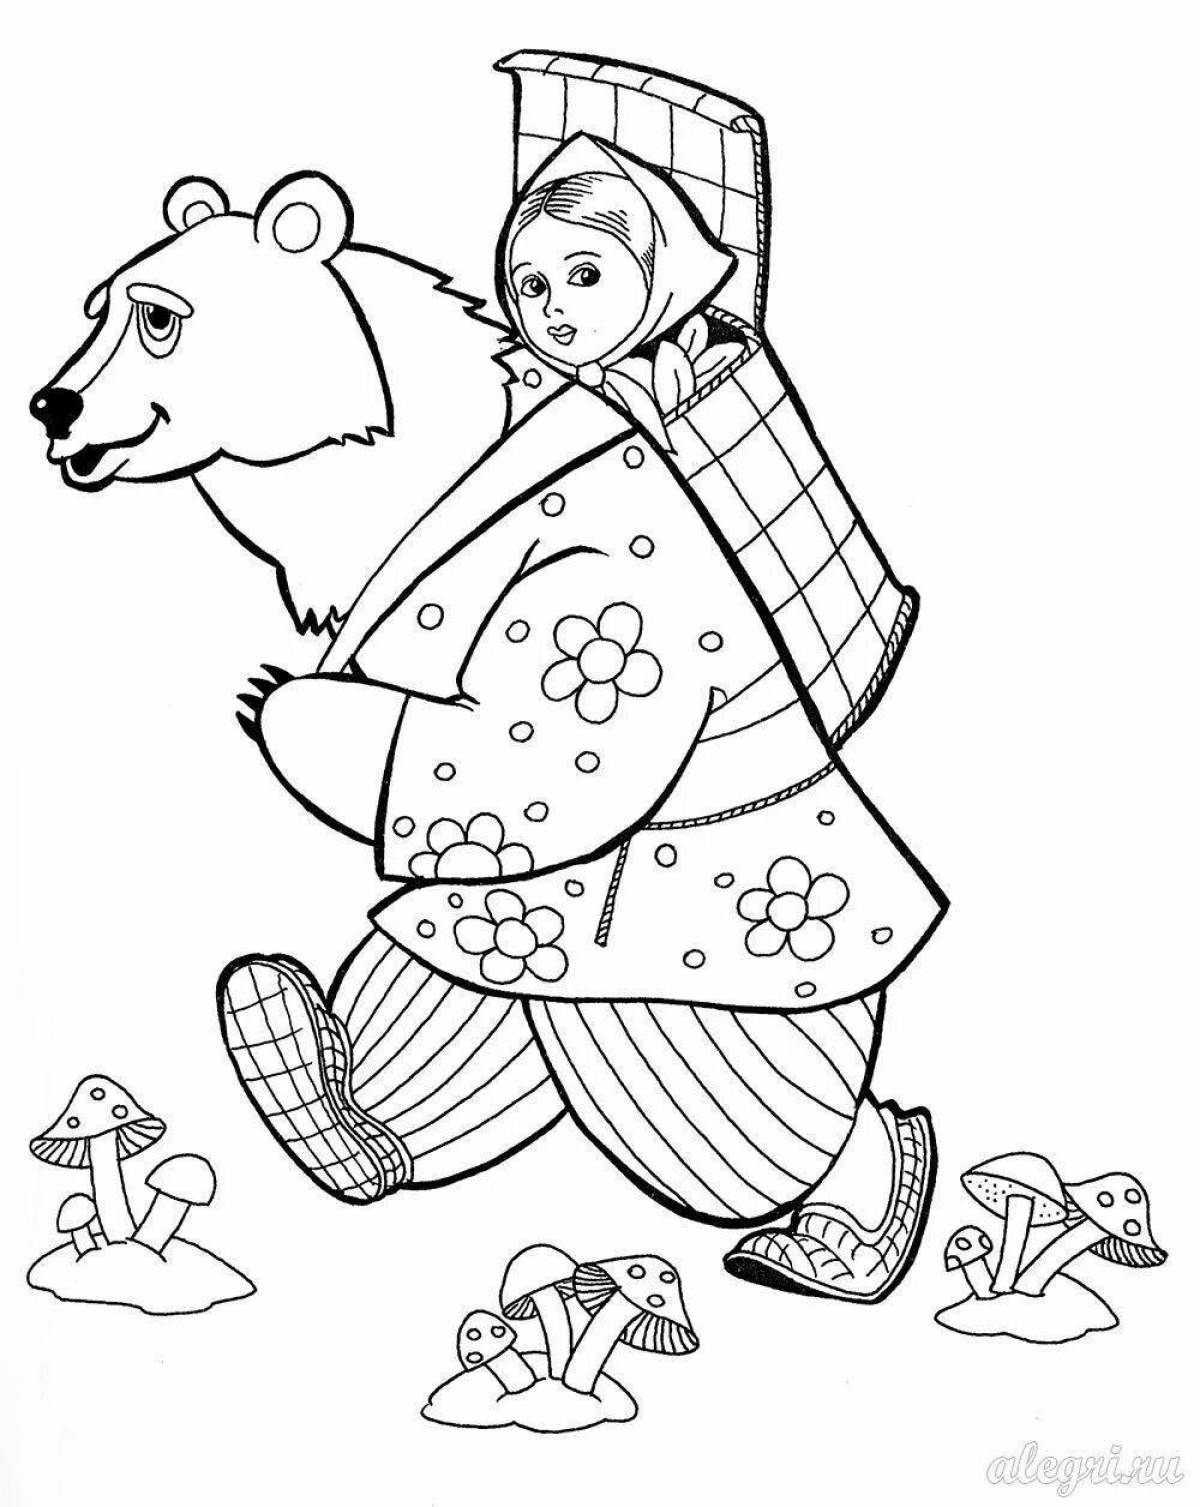 Funny fairy tale coloring pages